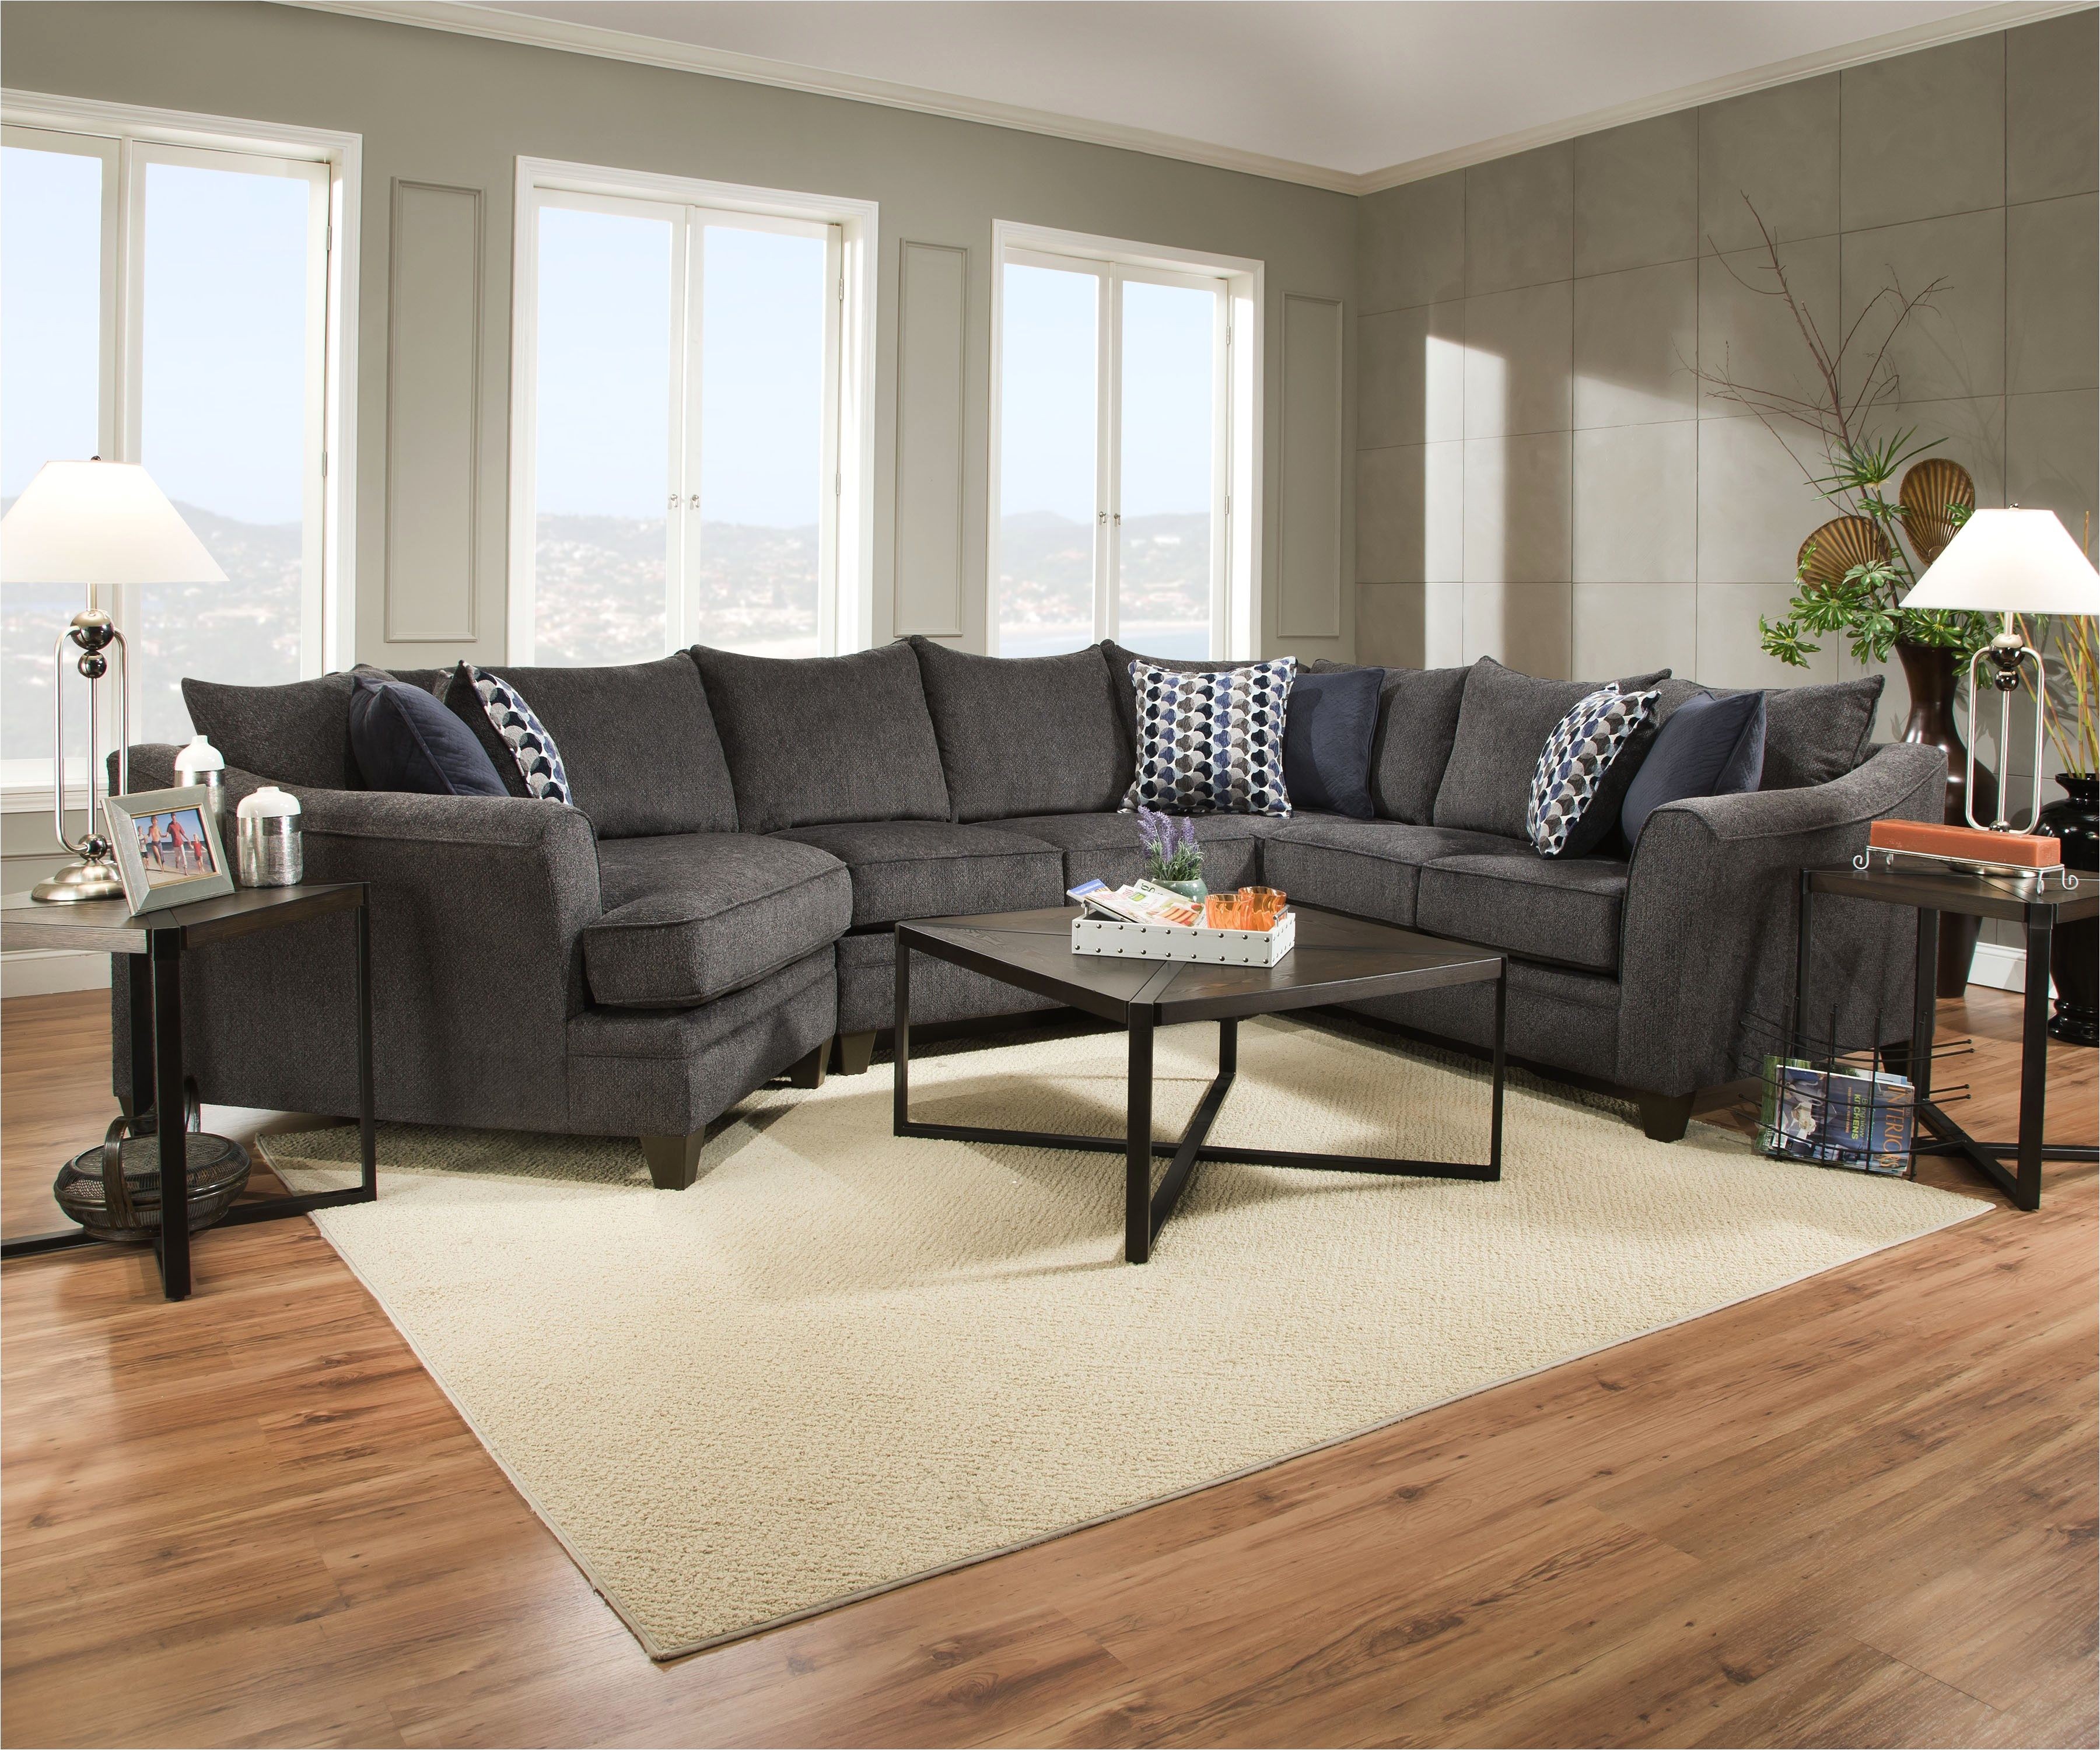 elegant sectional sofa under 500 graphics furniture magnificent sectional sofas under 500 best of